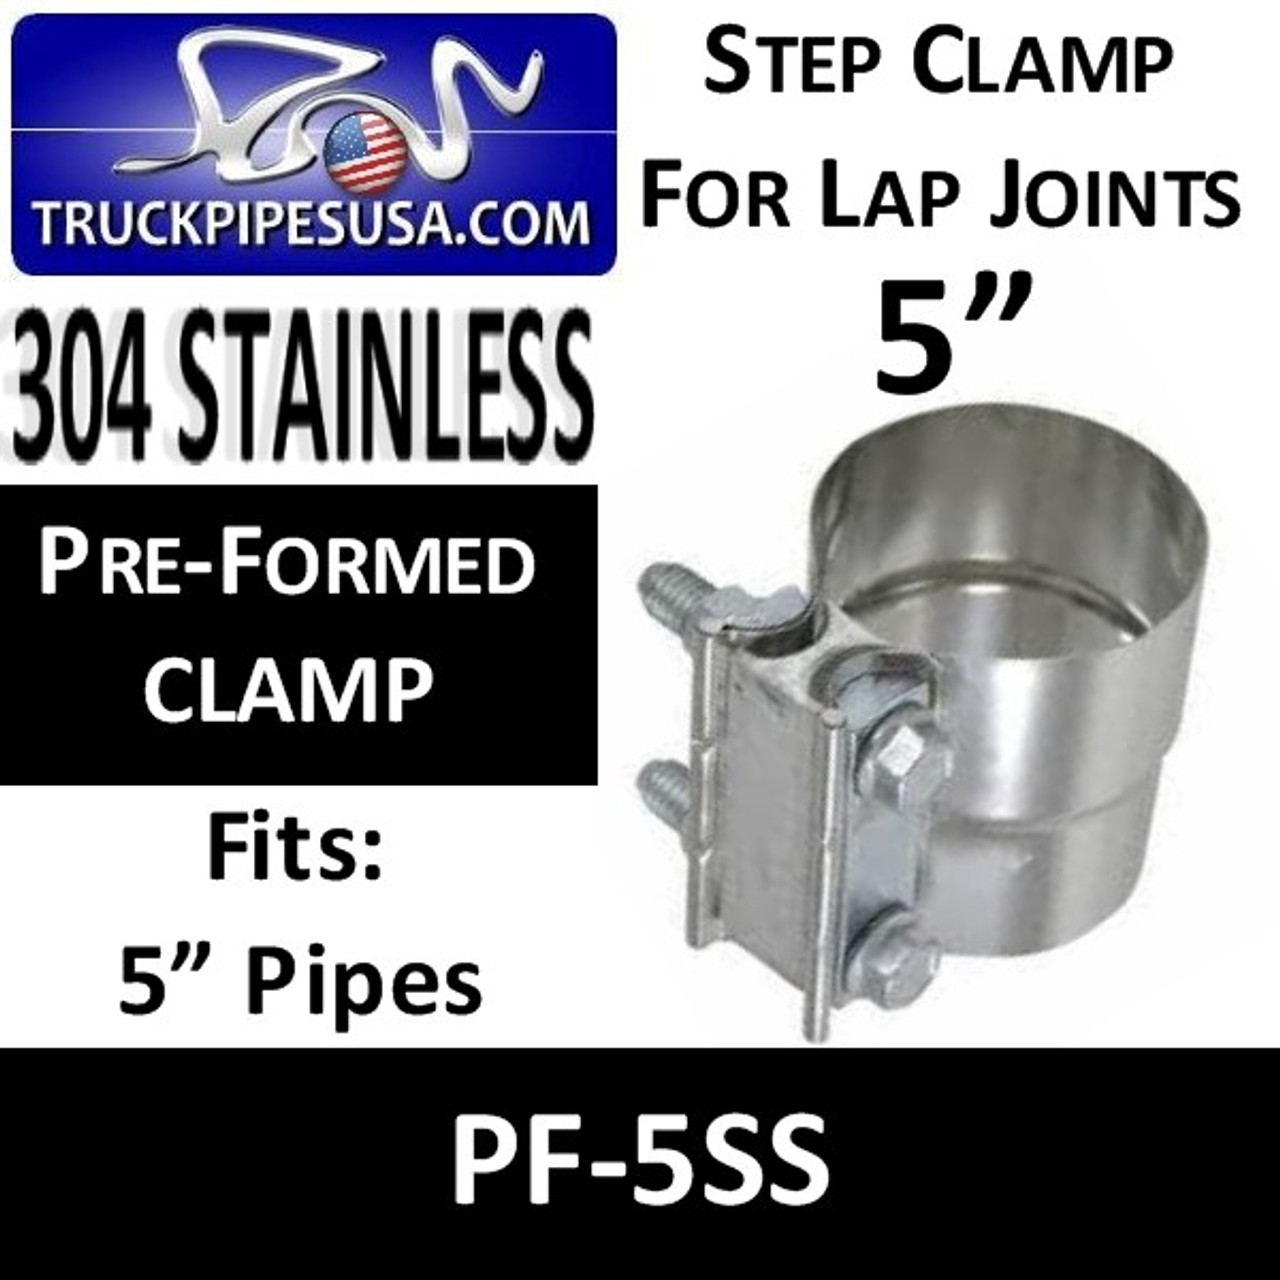 1 pc BAND-IT Smooth ID JS210 Stainless Steel Pre-formed Clamps 2 3/4"x3/4"x0.03"